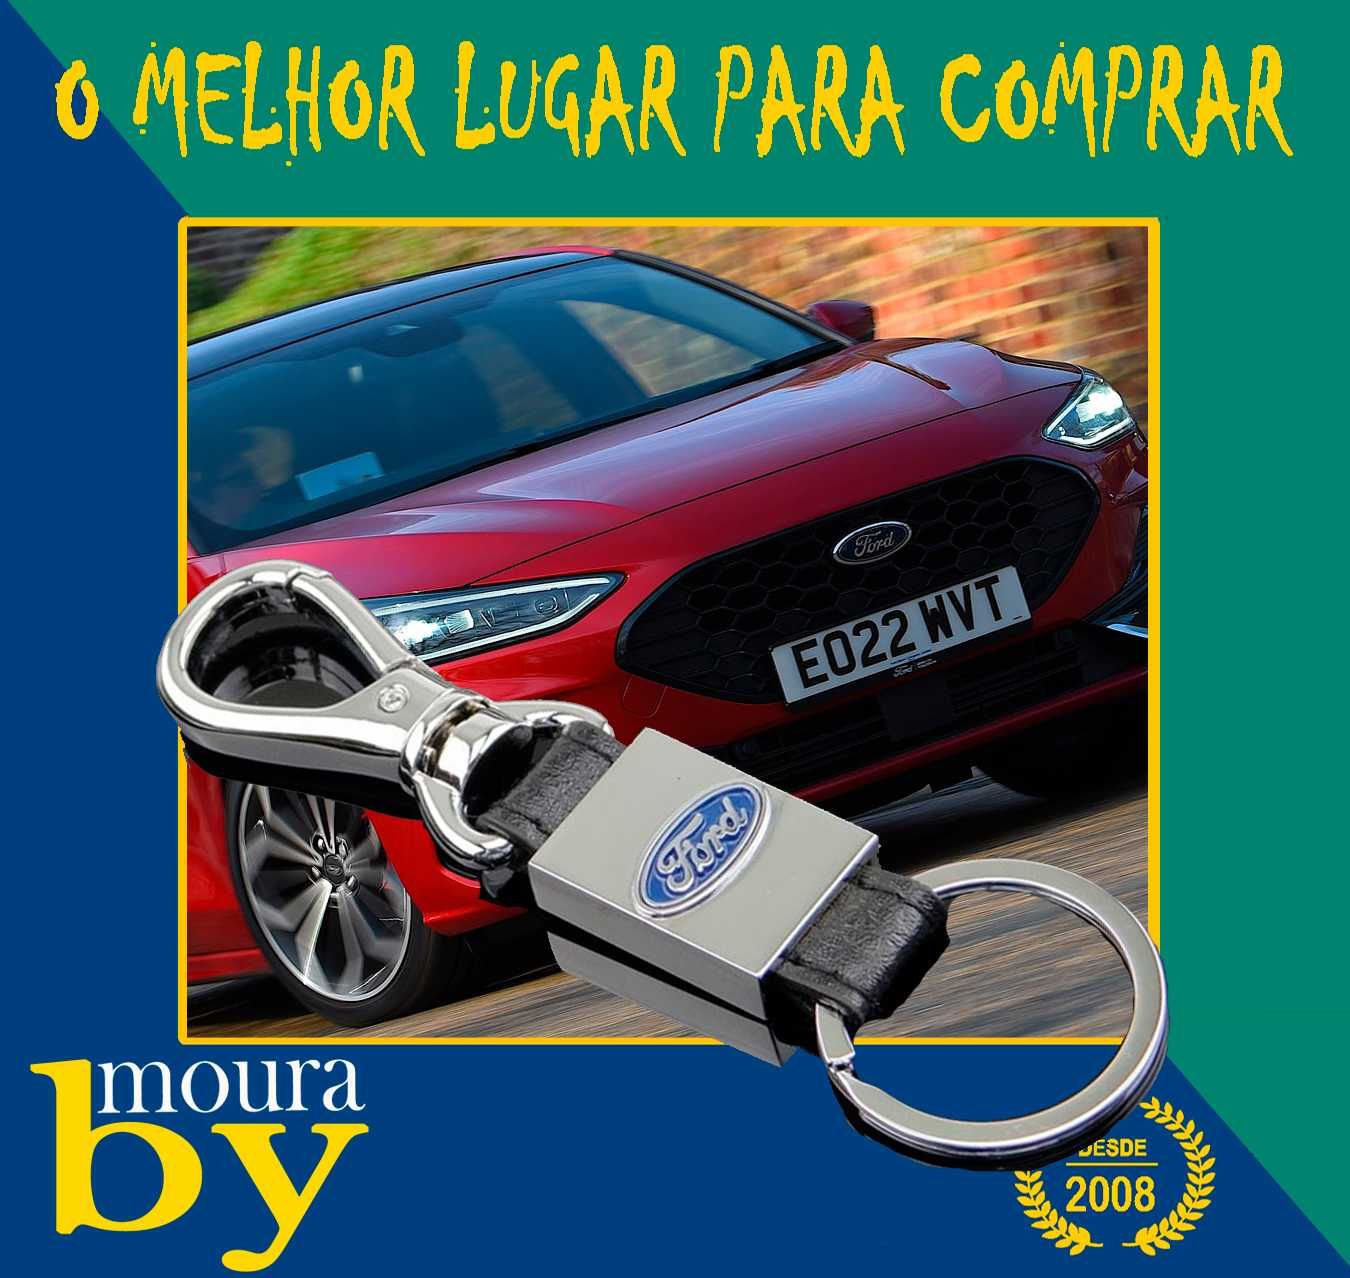 Porta Chaves Ford metálico e cabedal personalizados